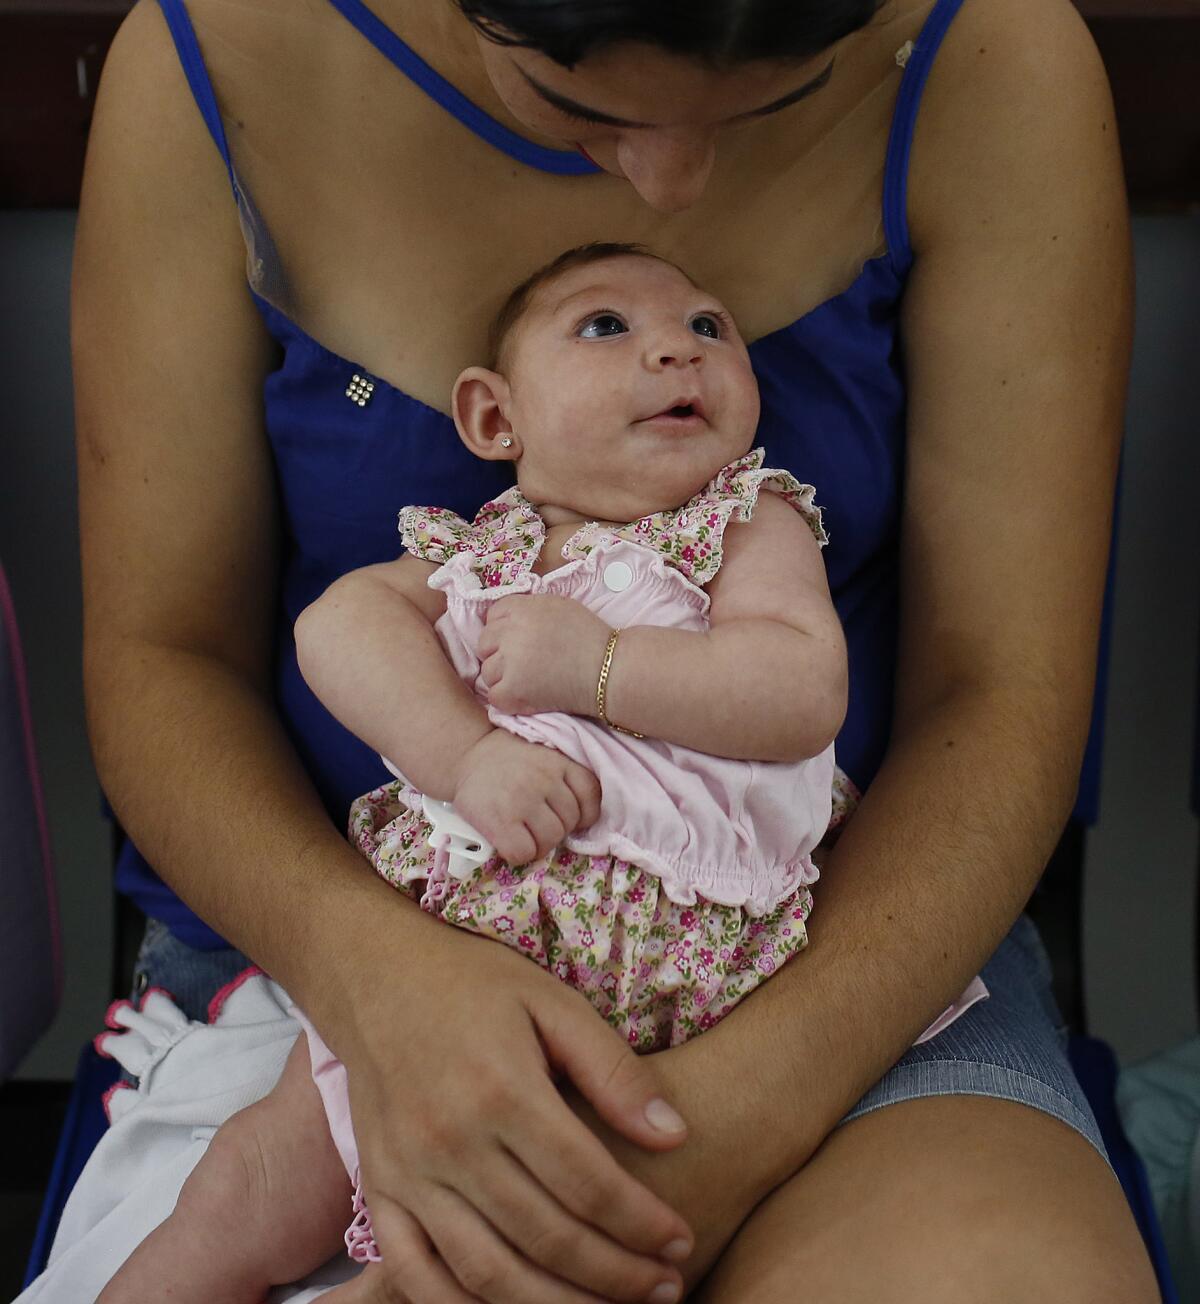 Maria Silva Flor, 20, holds her 2-month-old baby, Maria Alves, who was born with microcephaly. Mothers of children with microcephaly bring their babies twice a week to physiotherapy at Pedro I Municipal Hospital in Campina Grande, Brazil.